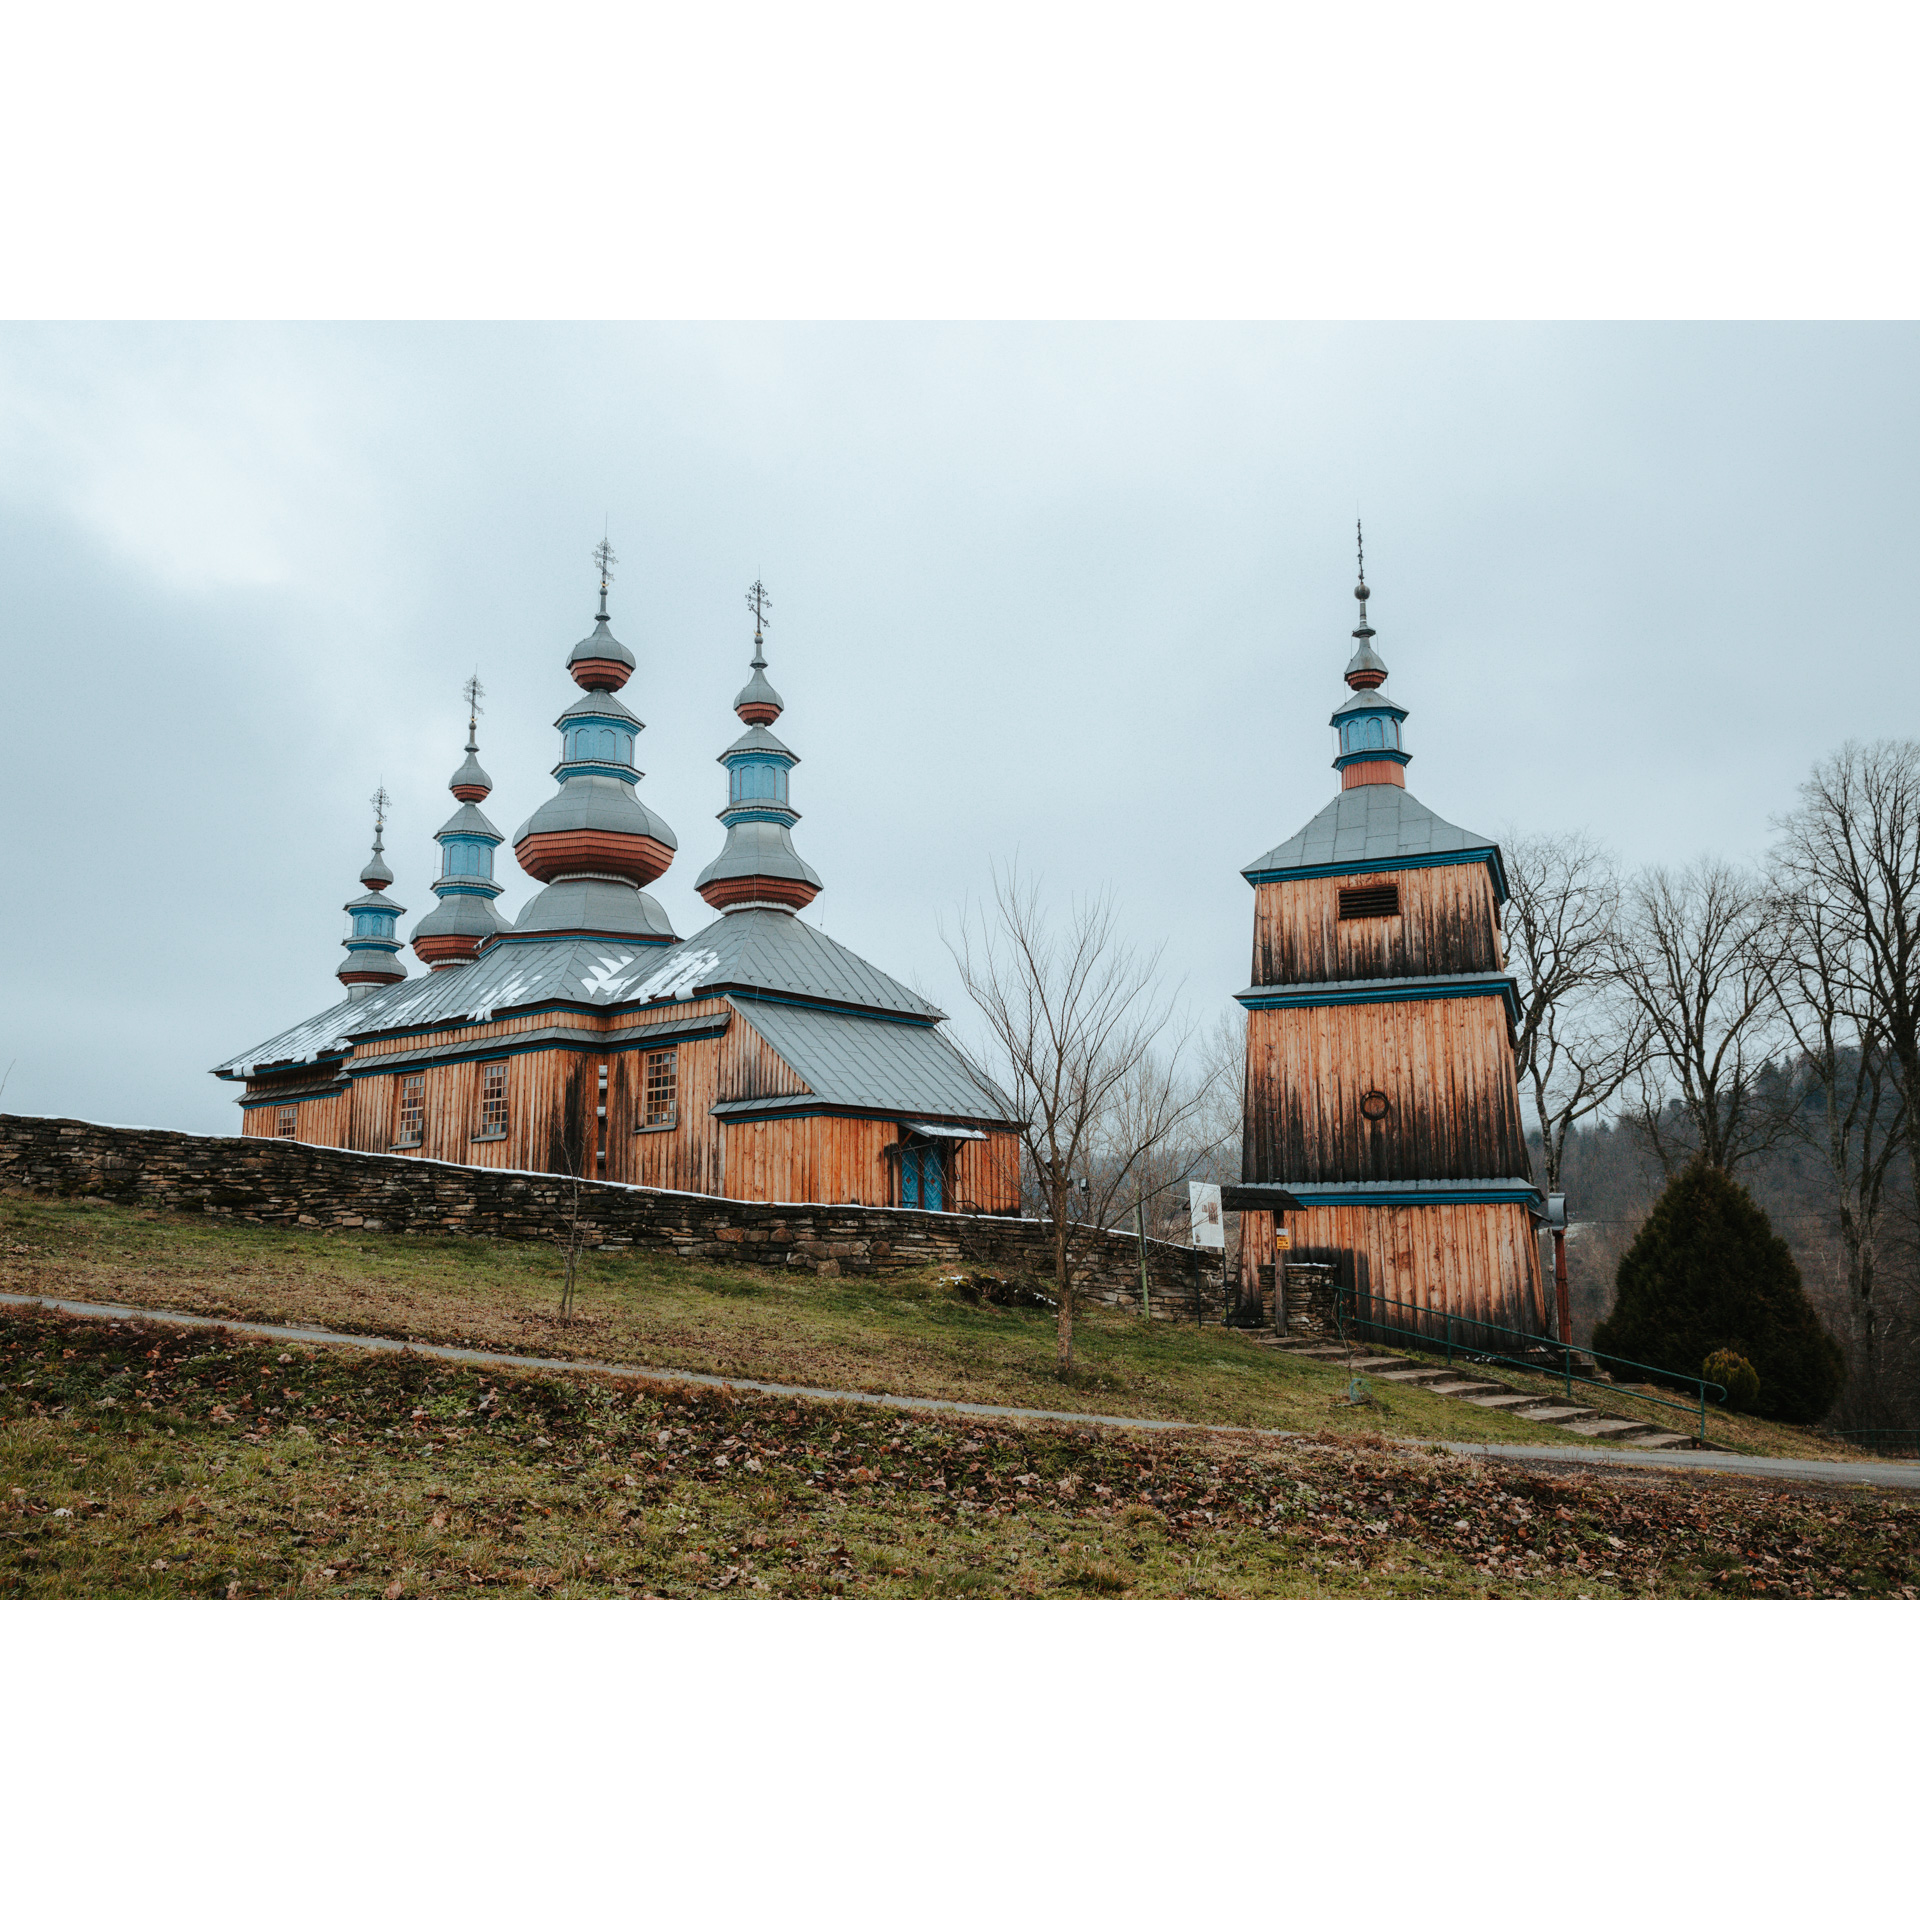 A wooden, historic Orthodox church topped with a roof with four domes and crosses, next to it there is a wooden belfry topped with a roof with one dome and a cross